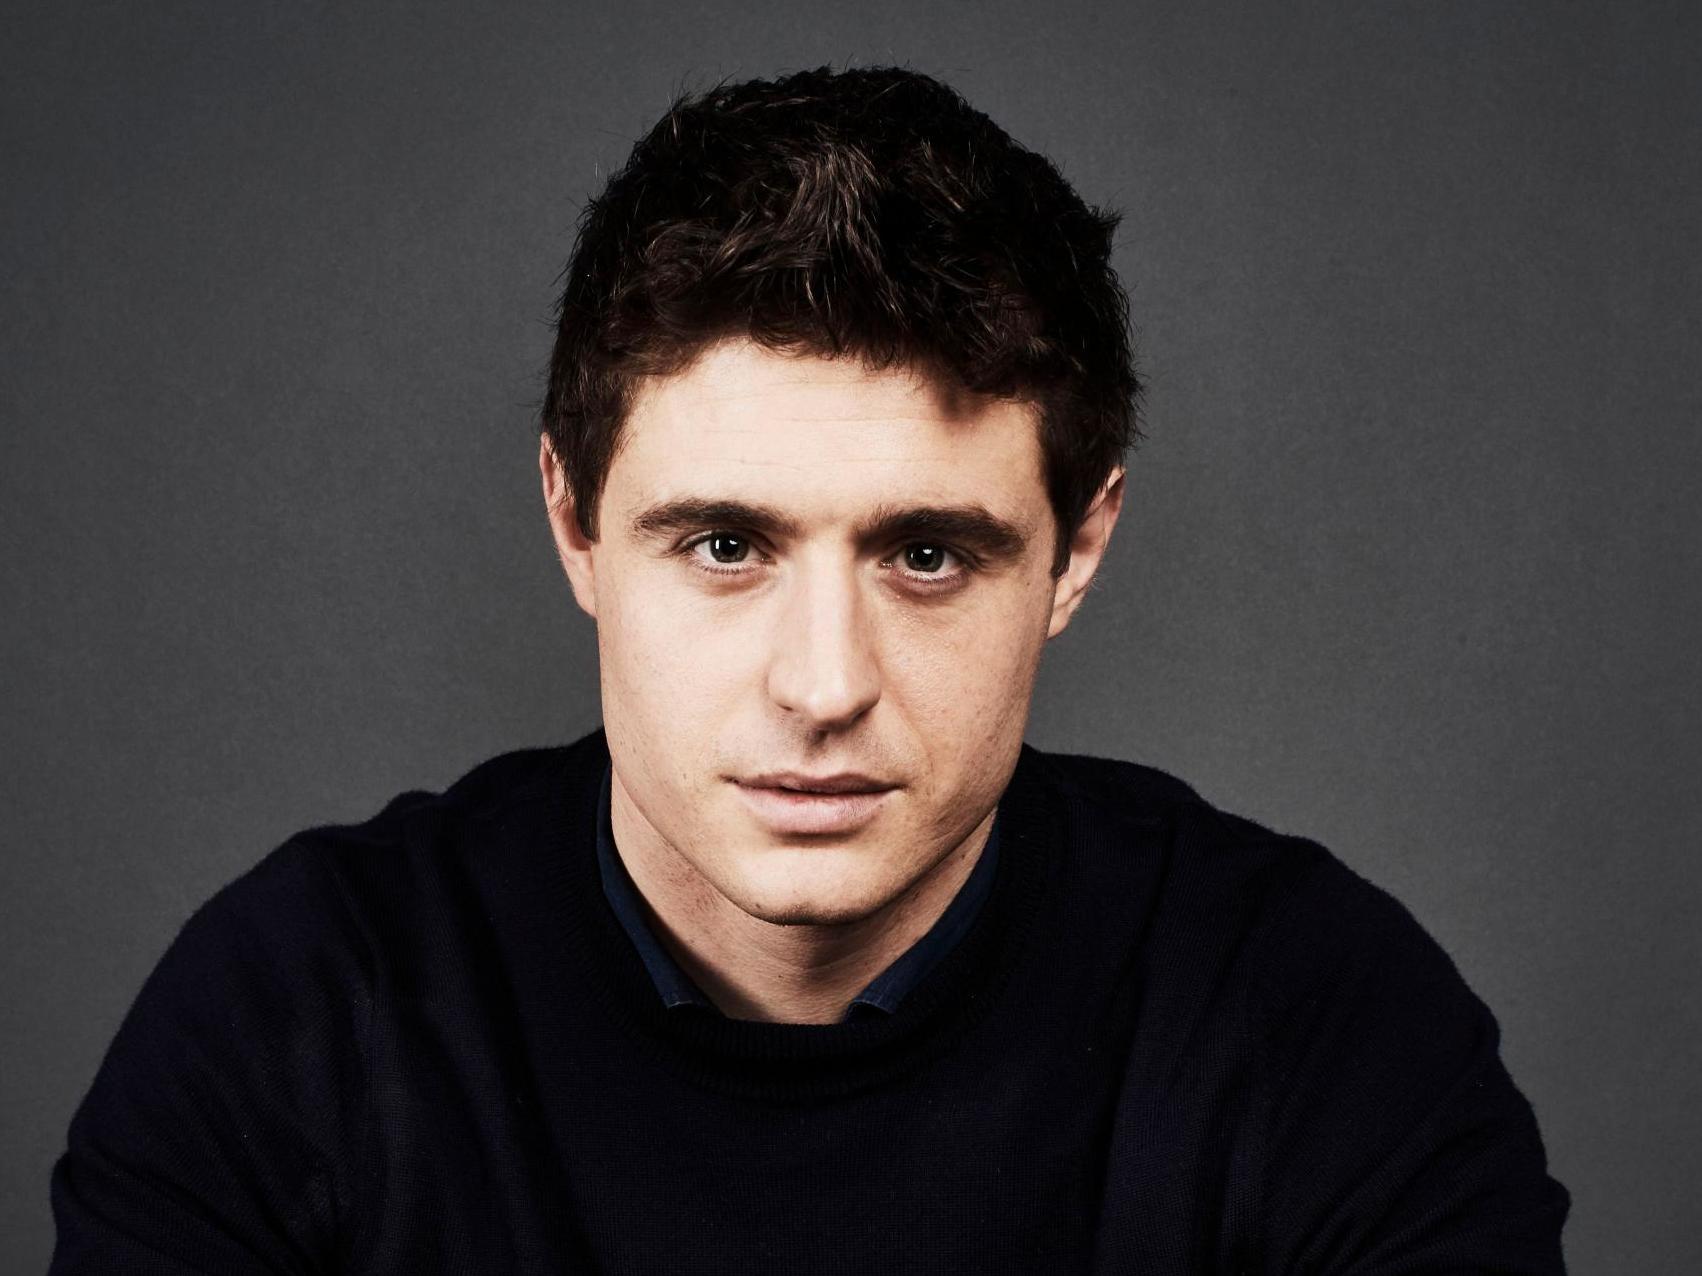 Max Irons ‘Cancel culture is a problem’ The Independent The